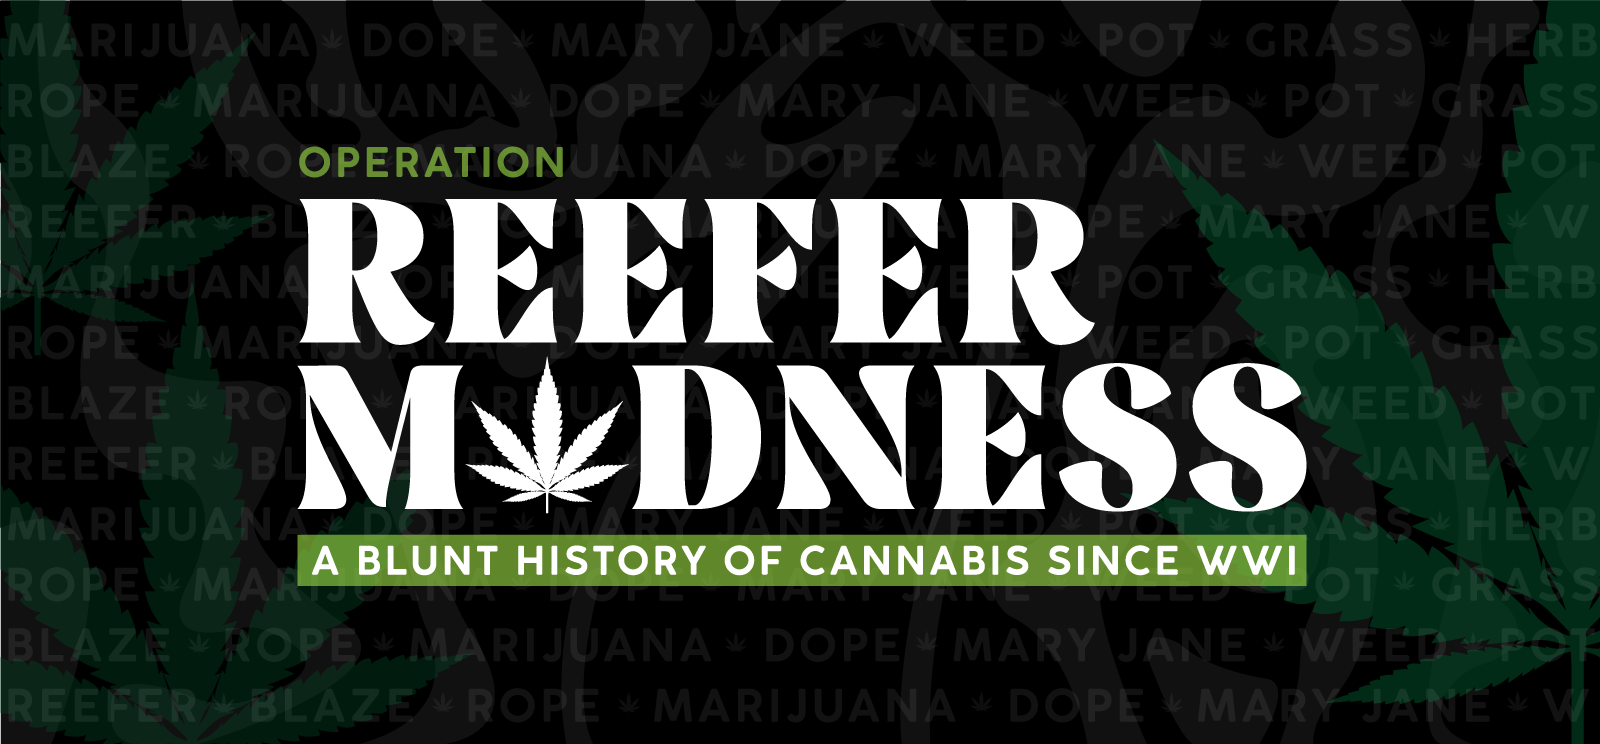 Dark green background with translucent green smoky shapes layered over translucent marijuana leaves and a pattern made of translucent text repeating slang terms for marijuana such as dope, Mary Jane, weed, grass, etc. Foreground text: 'Operation Reefer Madness / a Blunt History of Cannabis since WWI'.